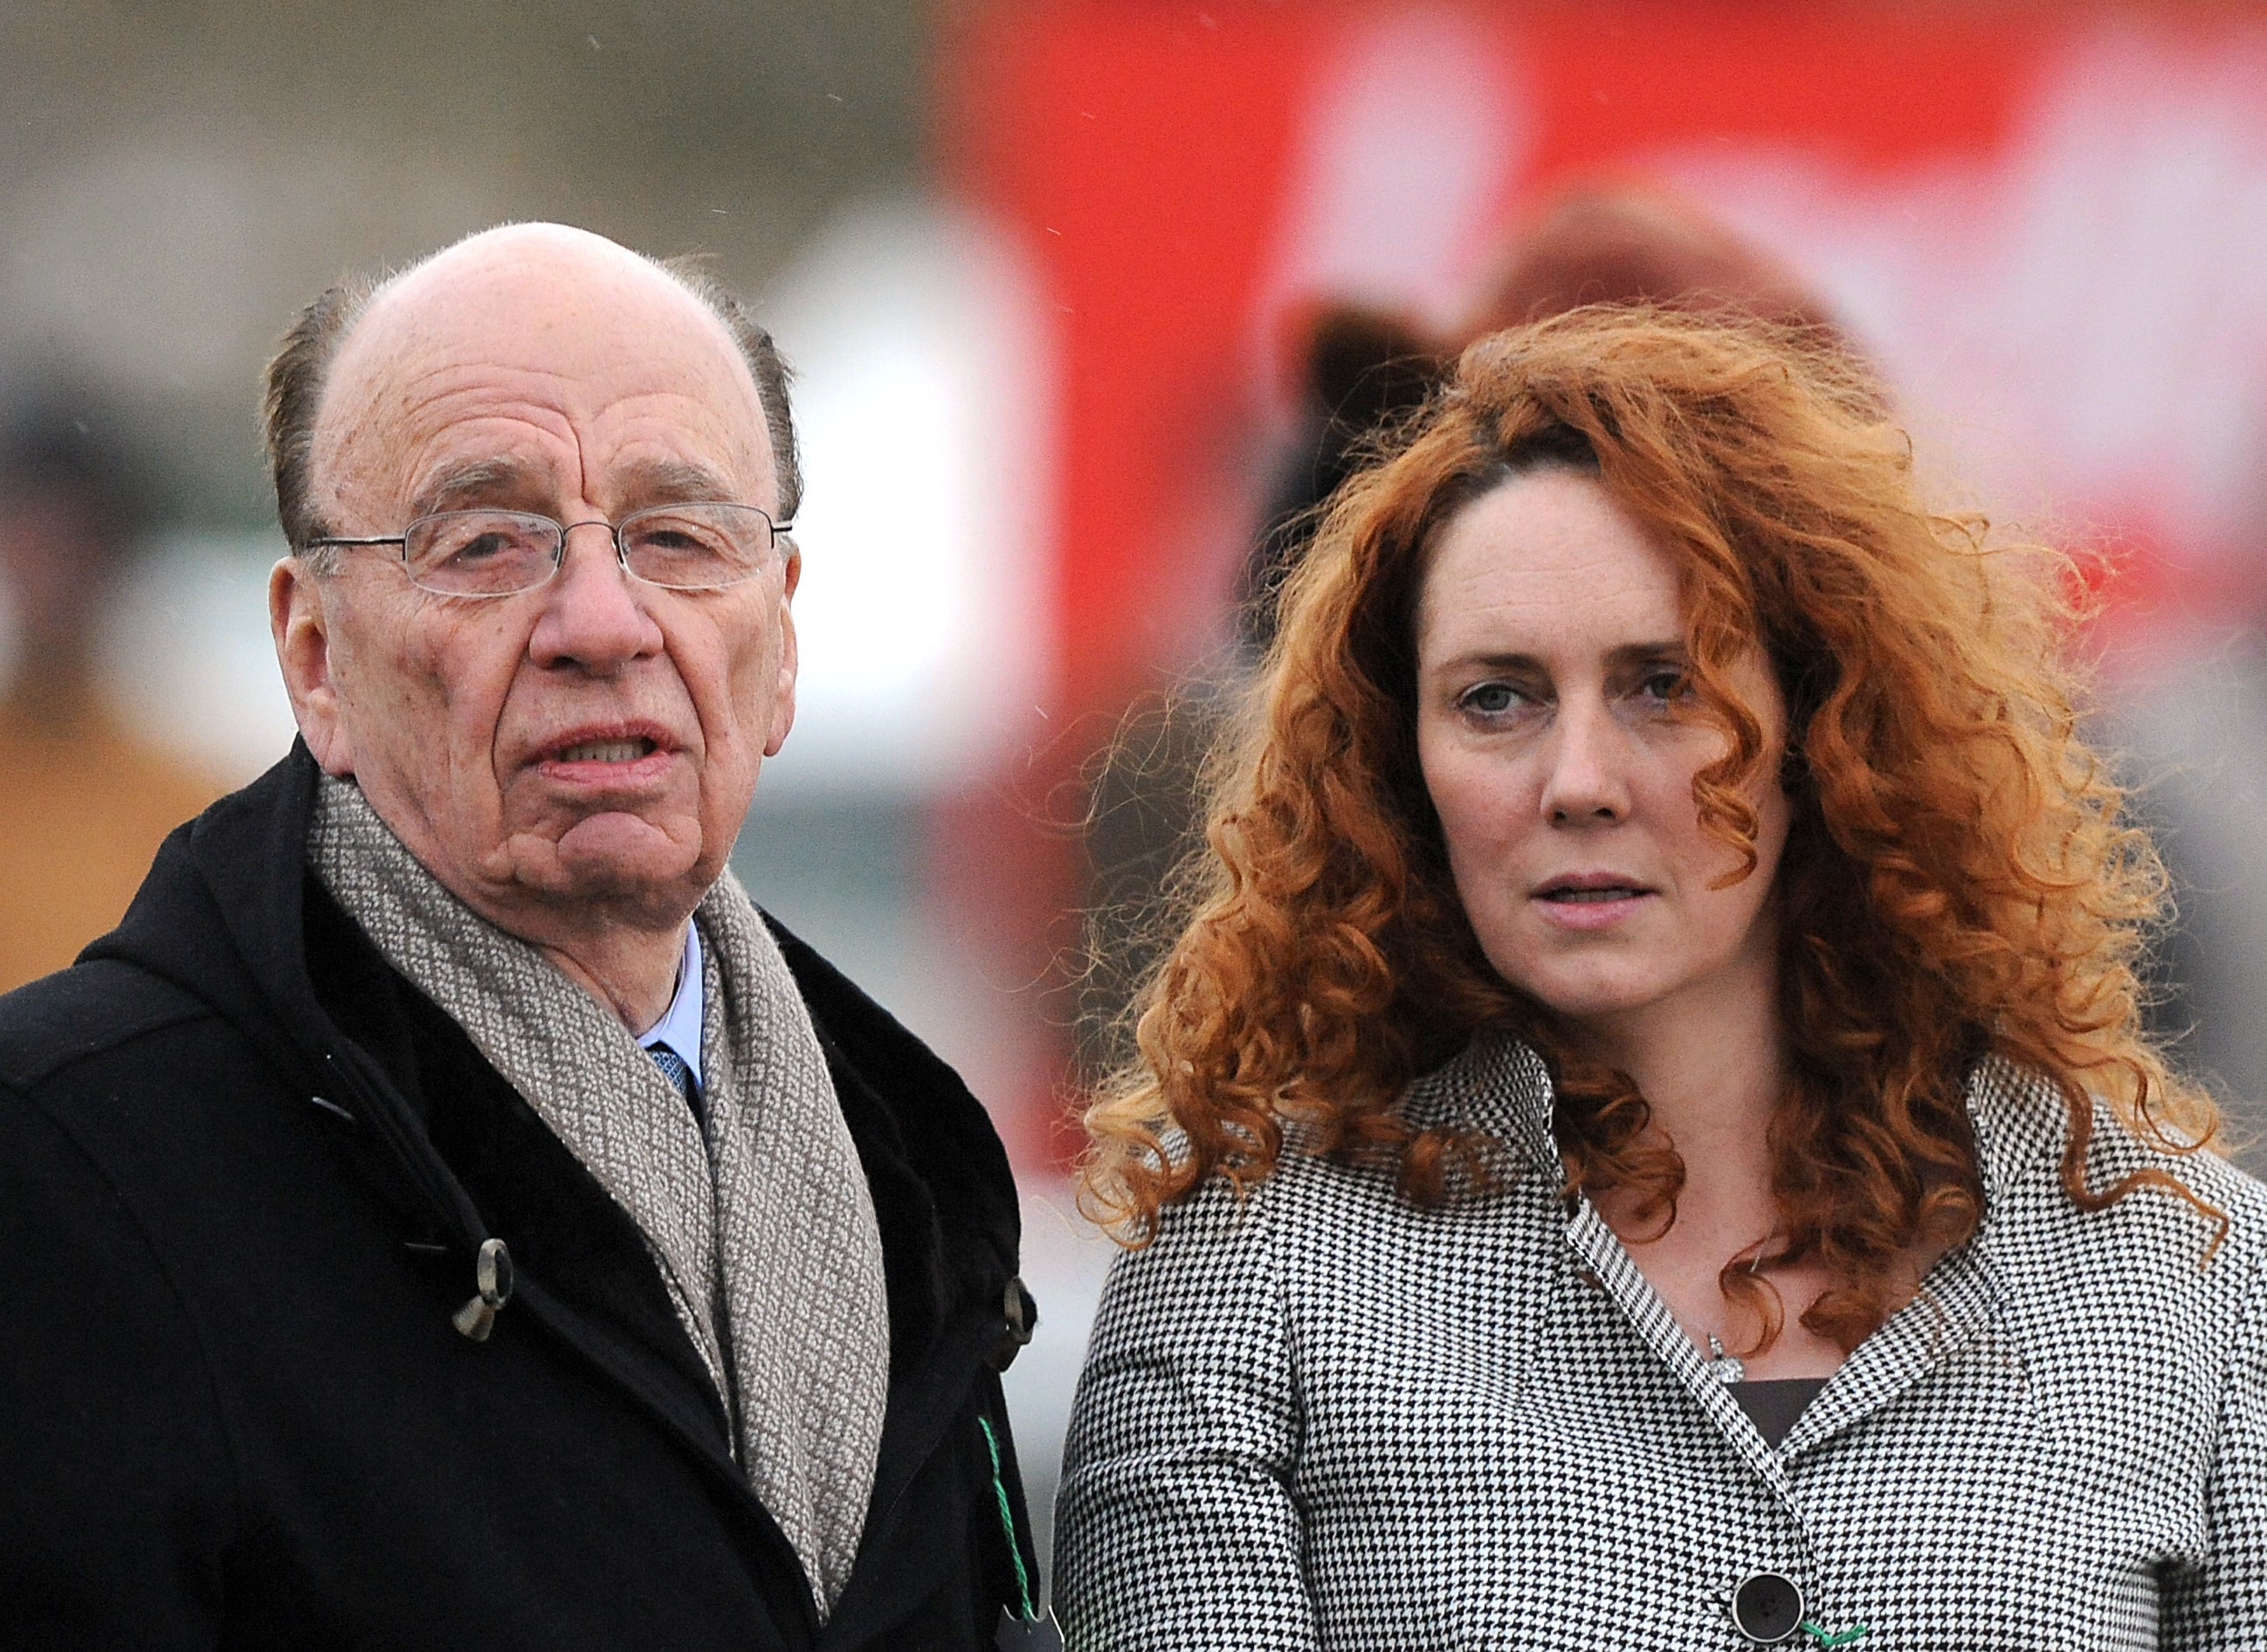 Rupert Murdoch and Rebekah Brooks are accused of giving false evidence